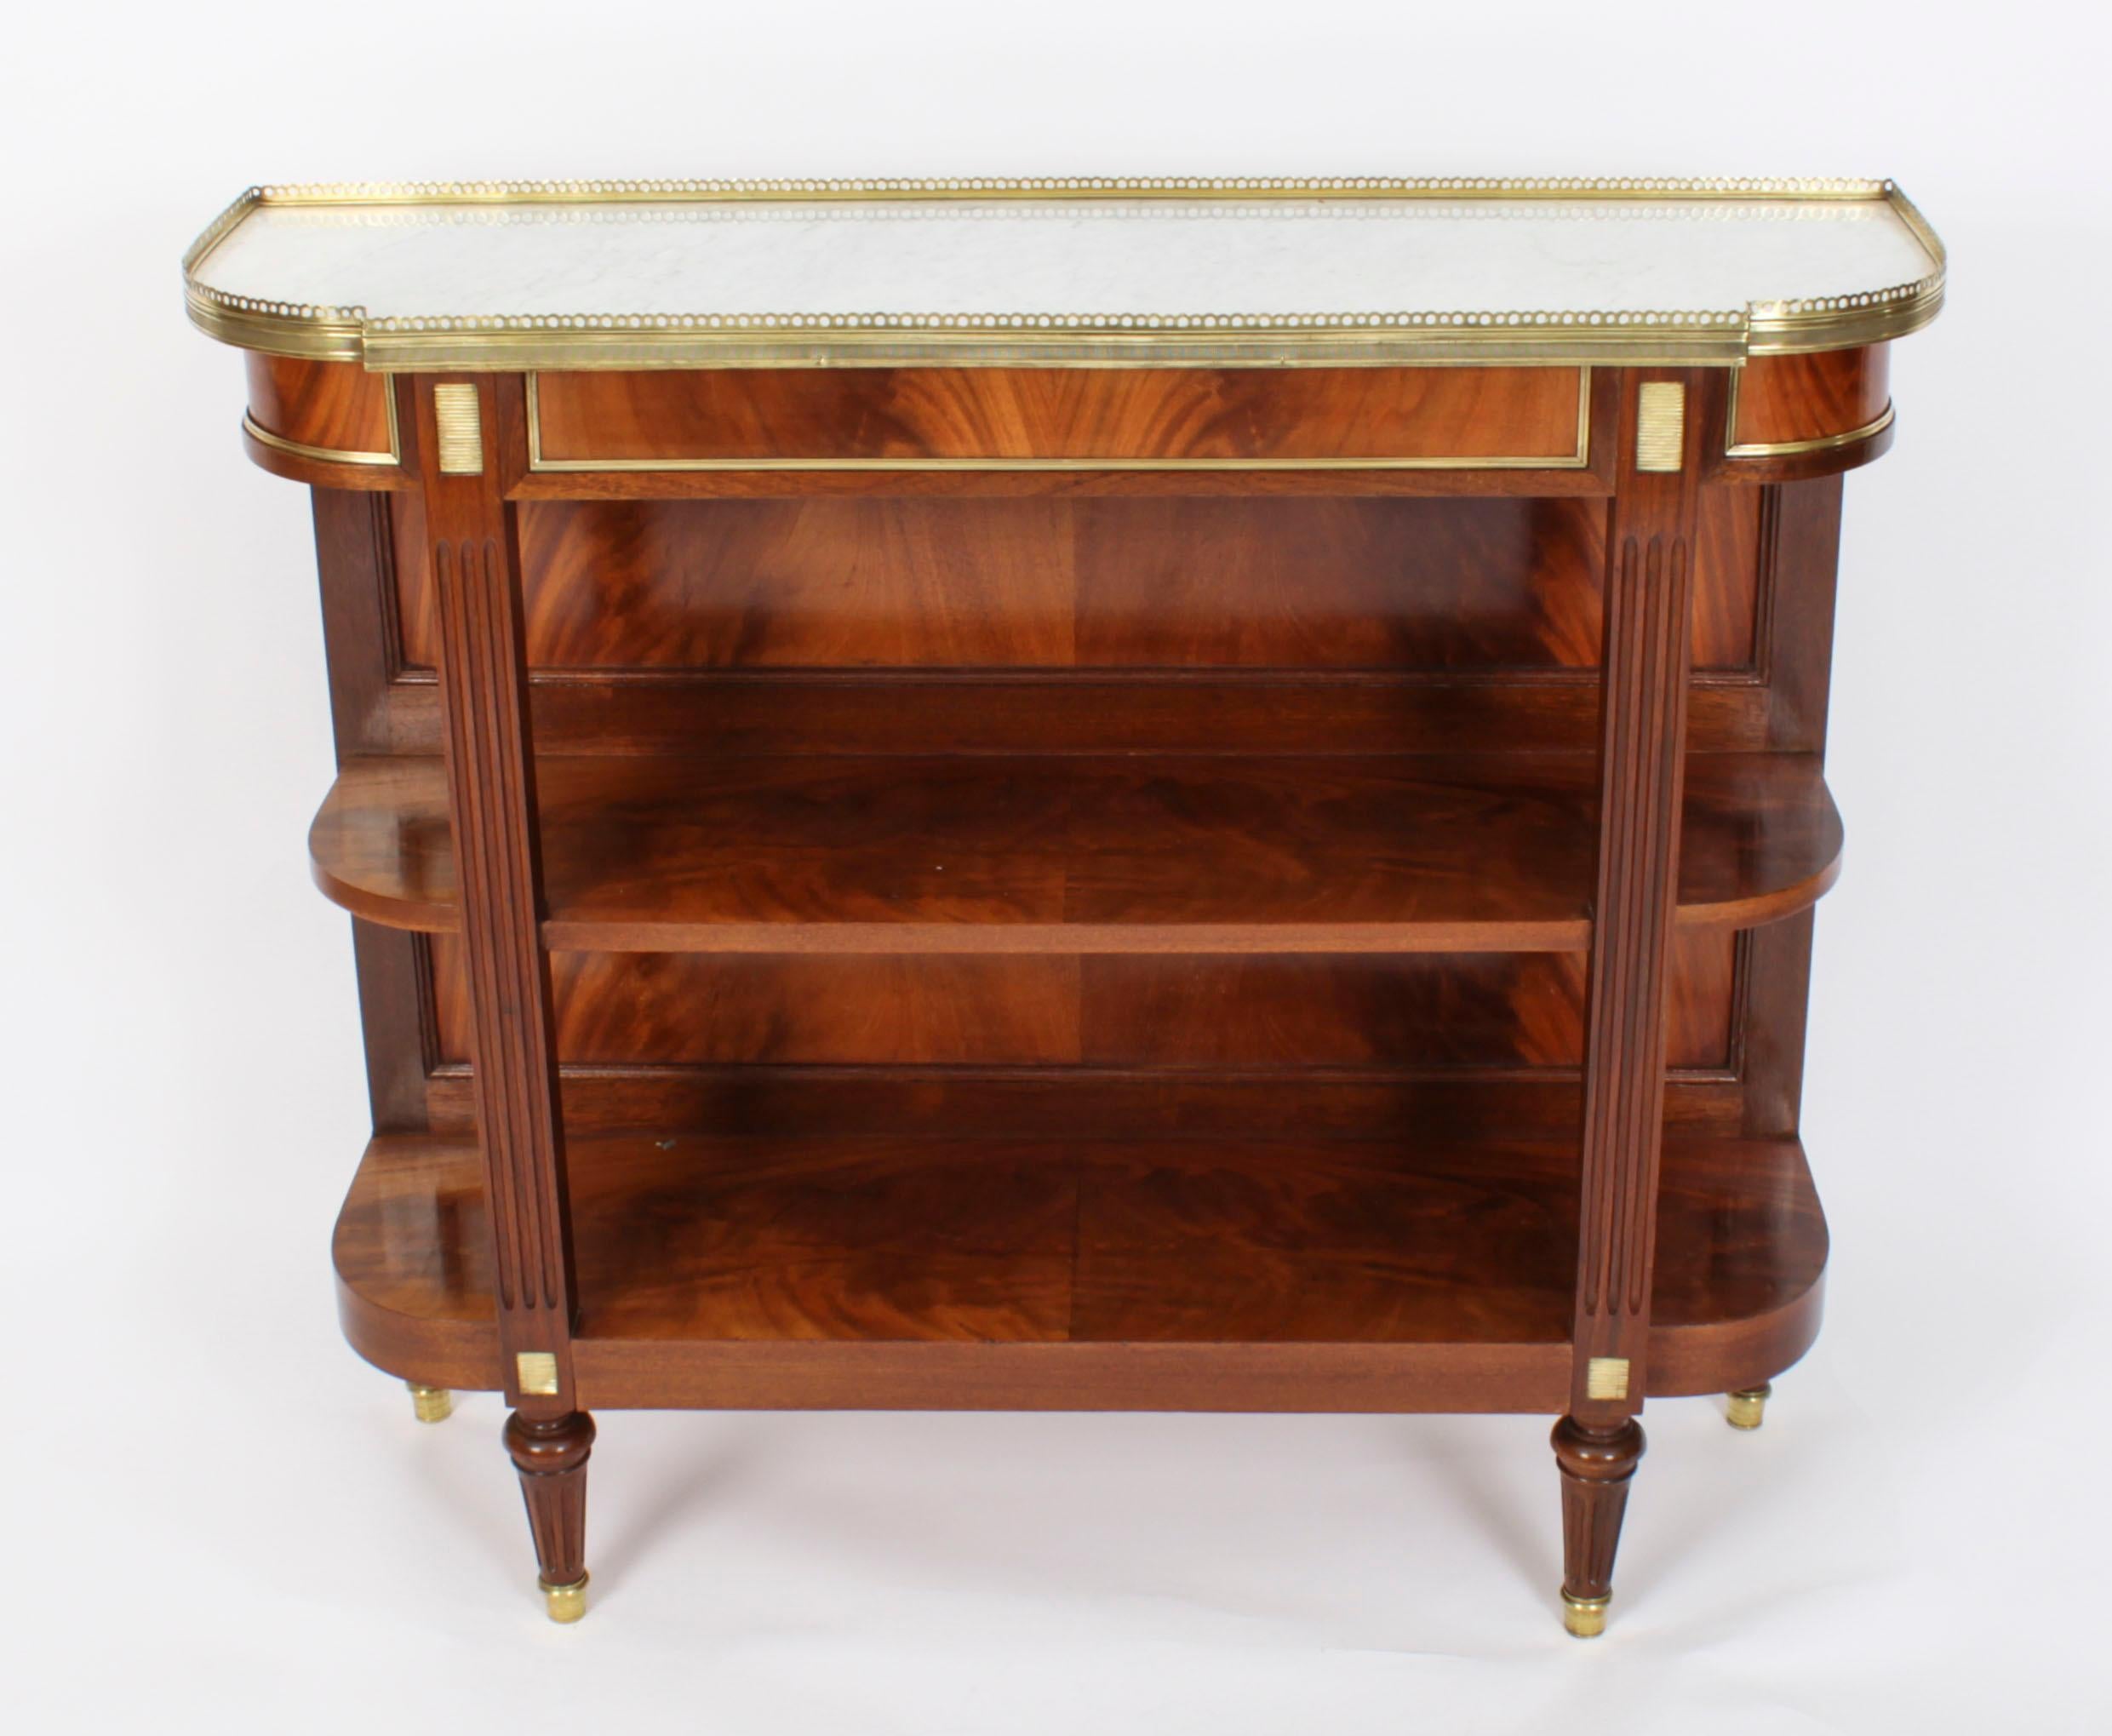 This is an elegant antique French Directoire ormolu mounted flame mahogany marble topped buffet, dating from Circa 1840.
 
It features a striking serpentine galleried inset white Carrara marble top above a decorative panelled frieze. This is above